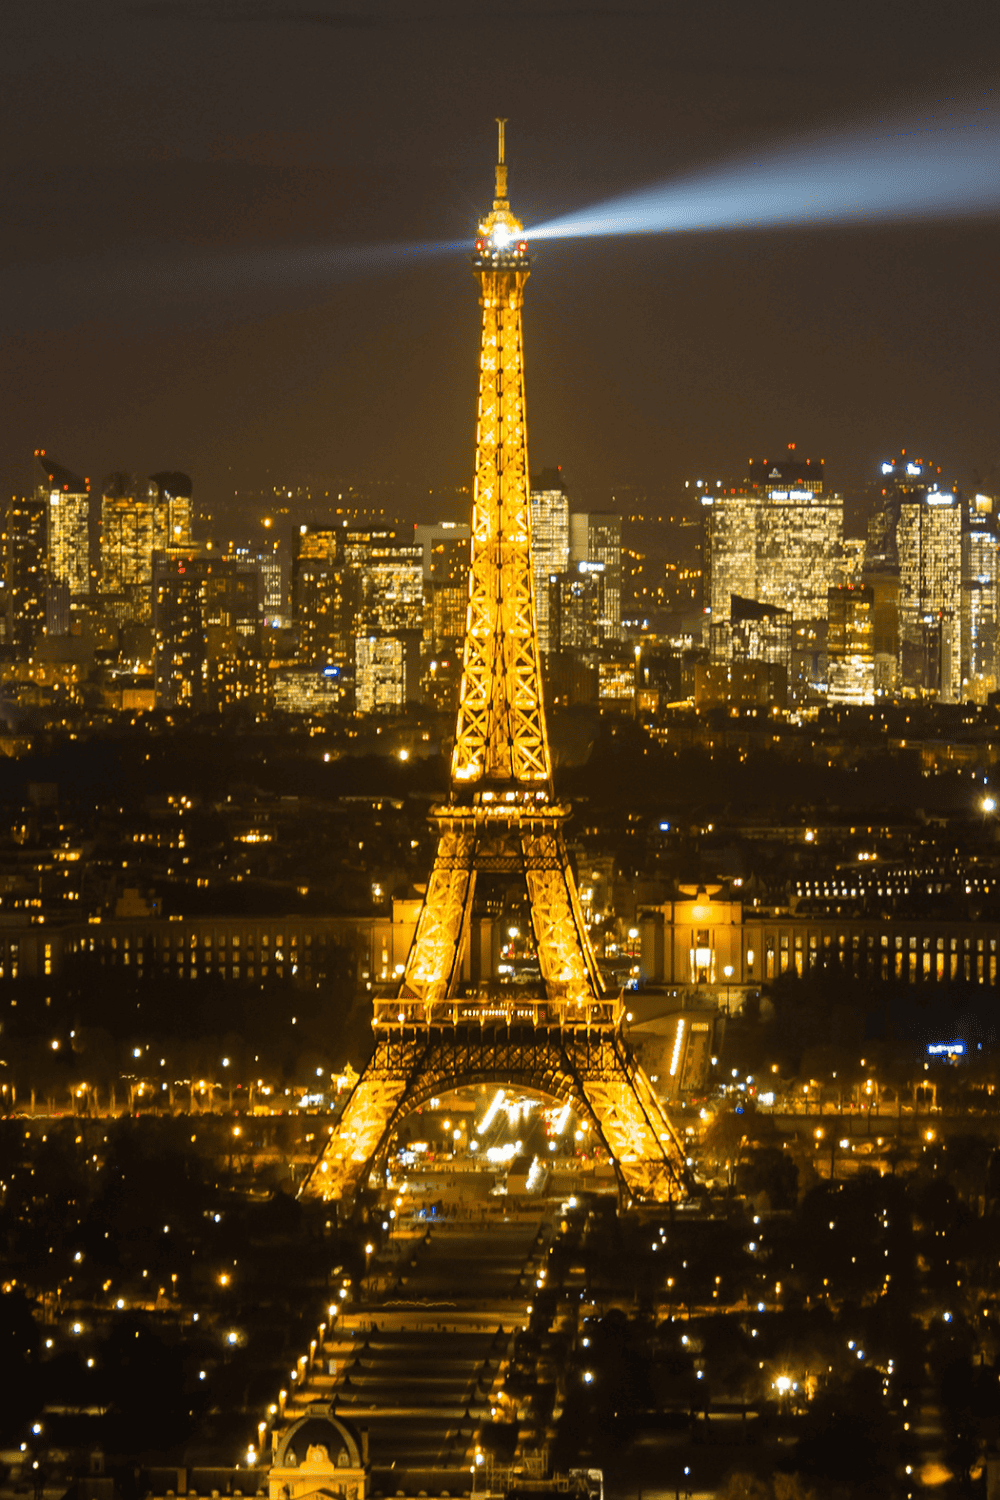 View of Eiffel Tower at night from Tour Montparnasse, with its beacon light piercing the dark sky. The Parisian cityscape glows with lights stretching towards the horizon, highlighting the contrast between the landmark and the urban environment.